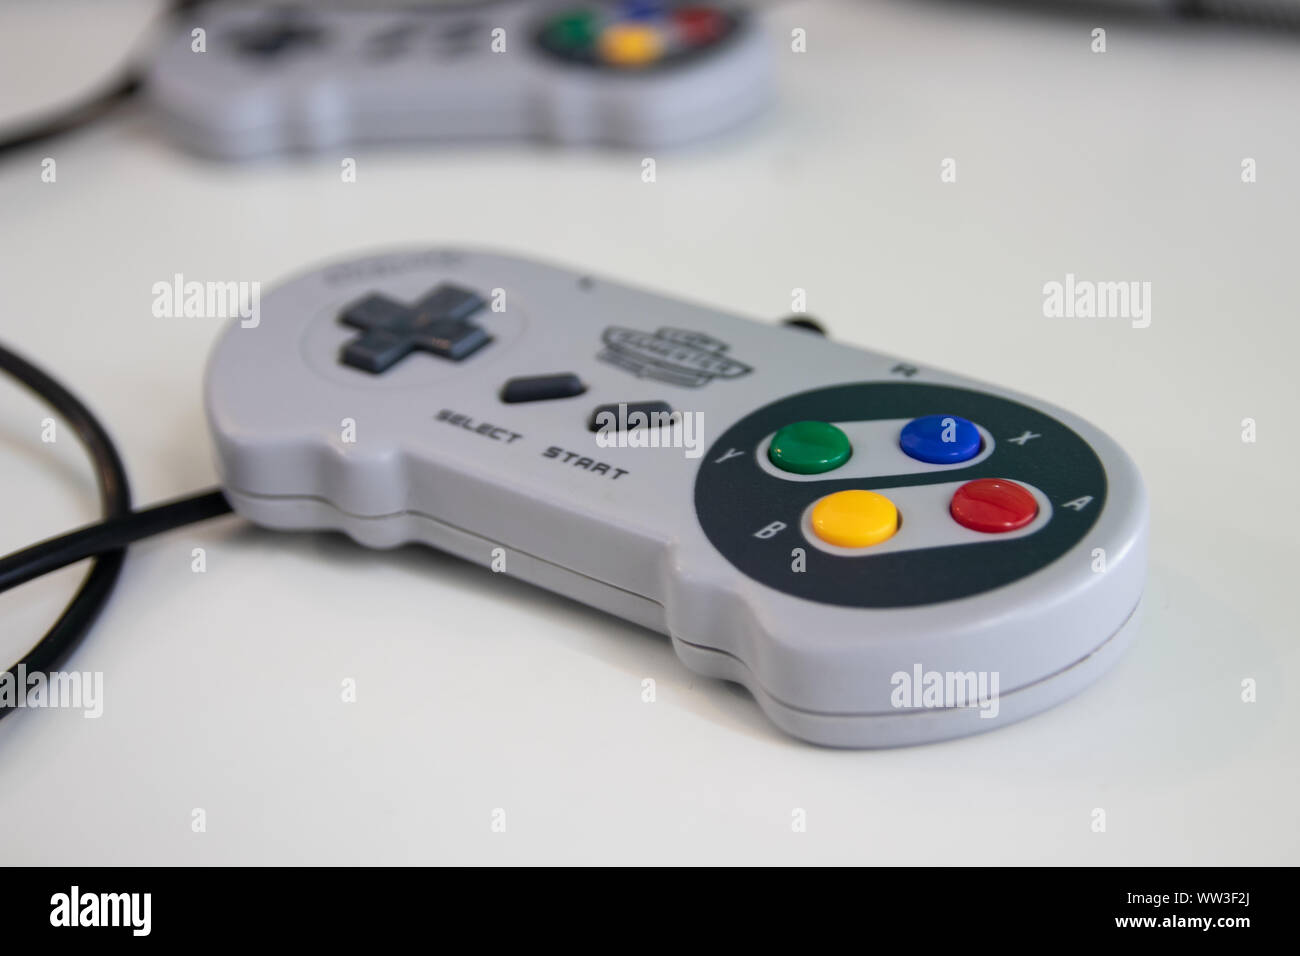 Snes High Resolution Stock Photography Images - Alamy